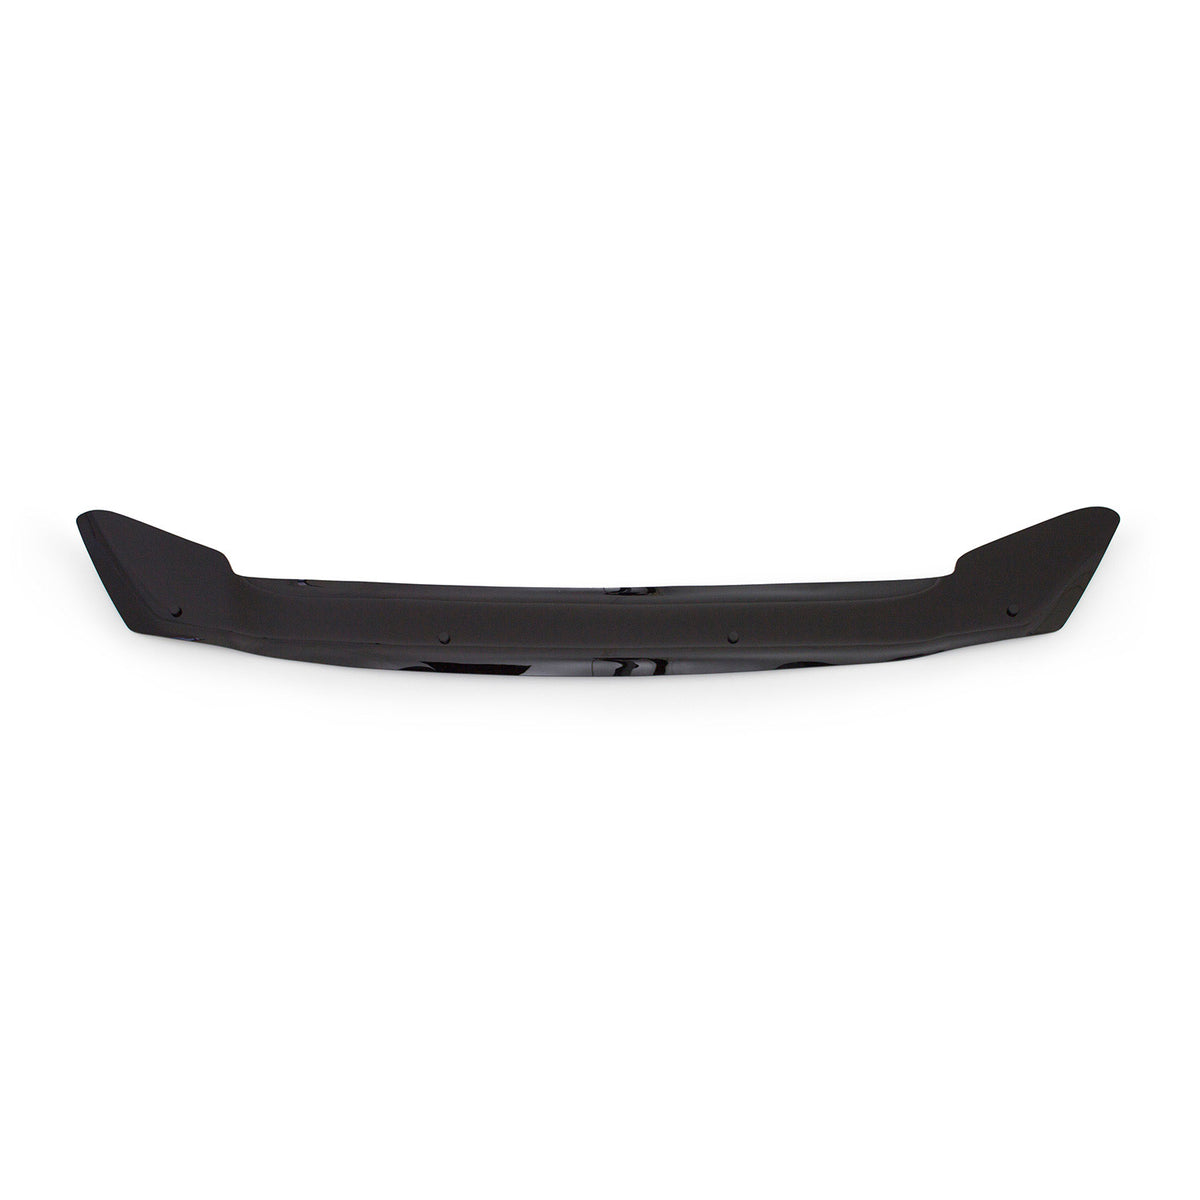 Bonnet deflector insect stone chip protection for Kia Ceed 2012-2024 dark